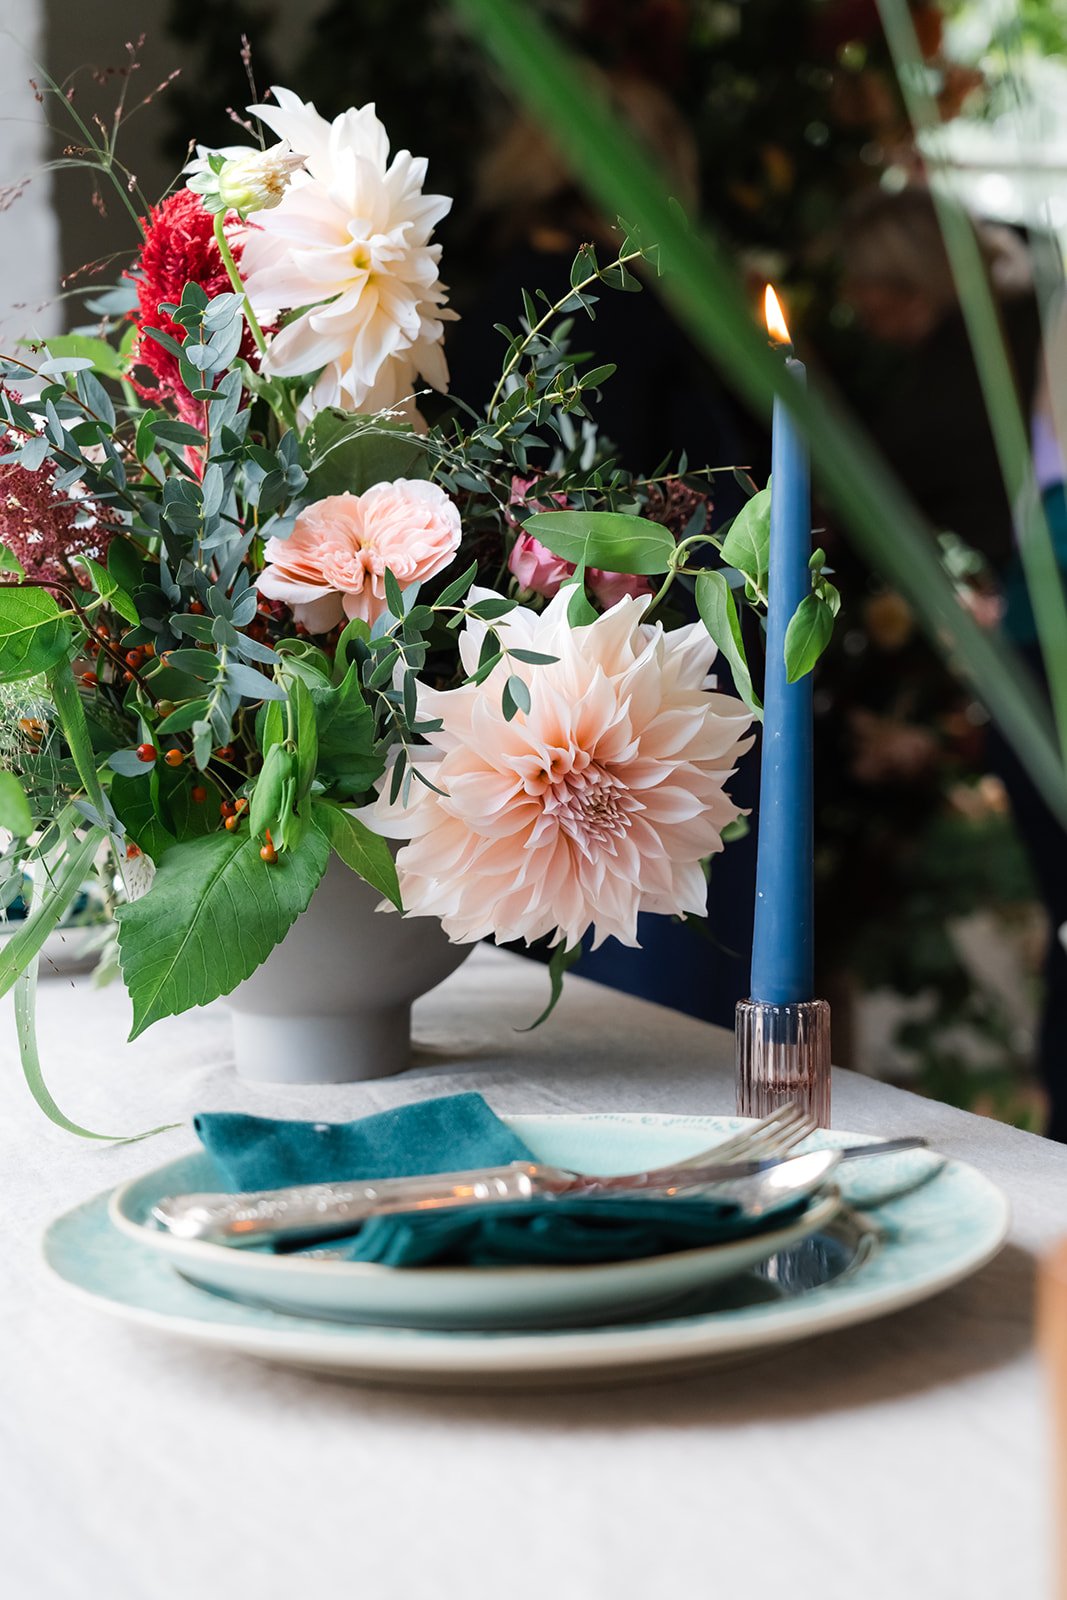 Stunning table setting with eco friendly floristry methods and bright blue candles